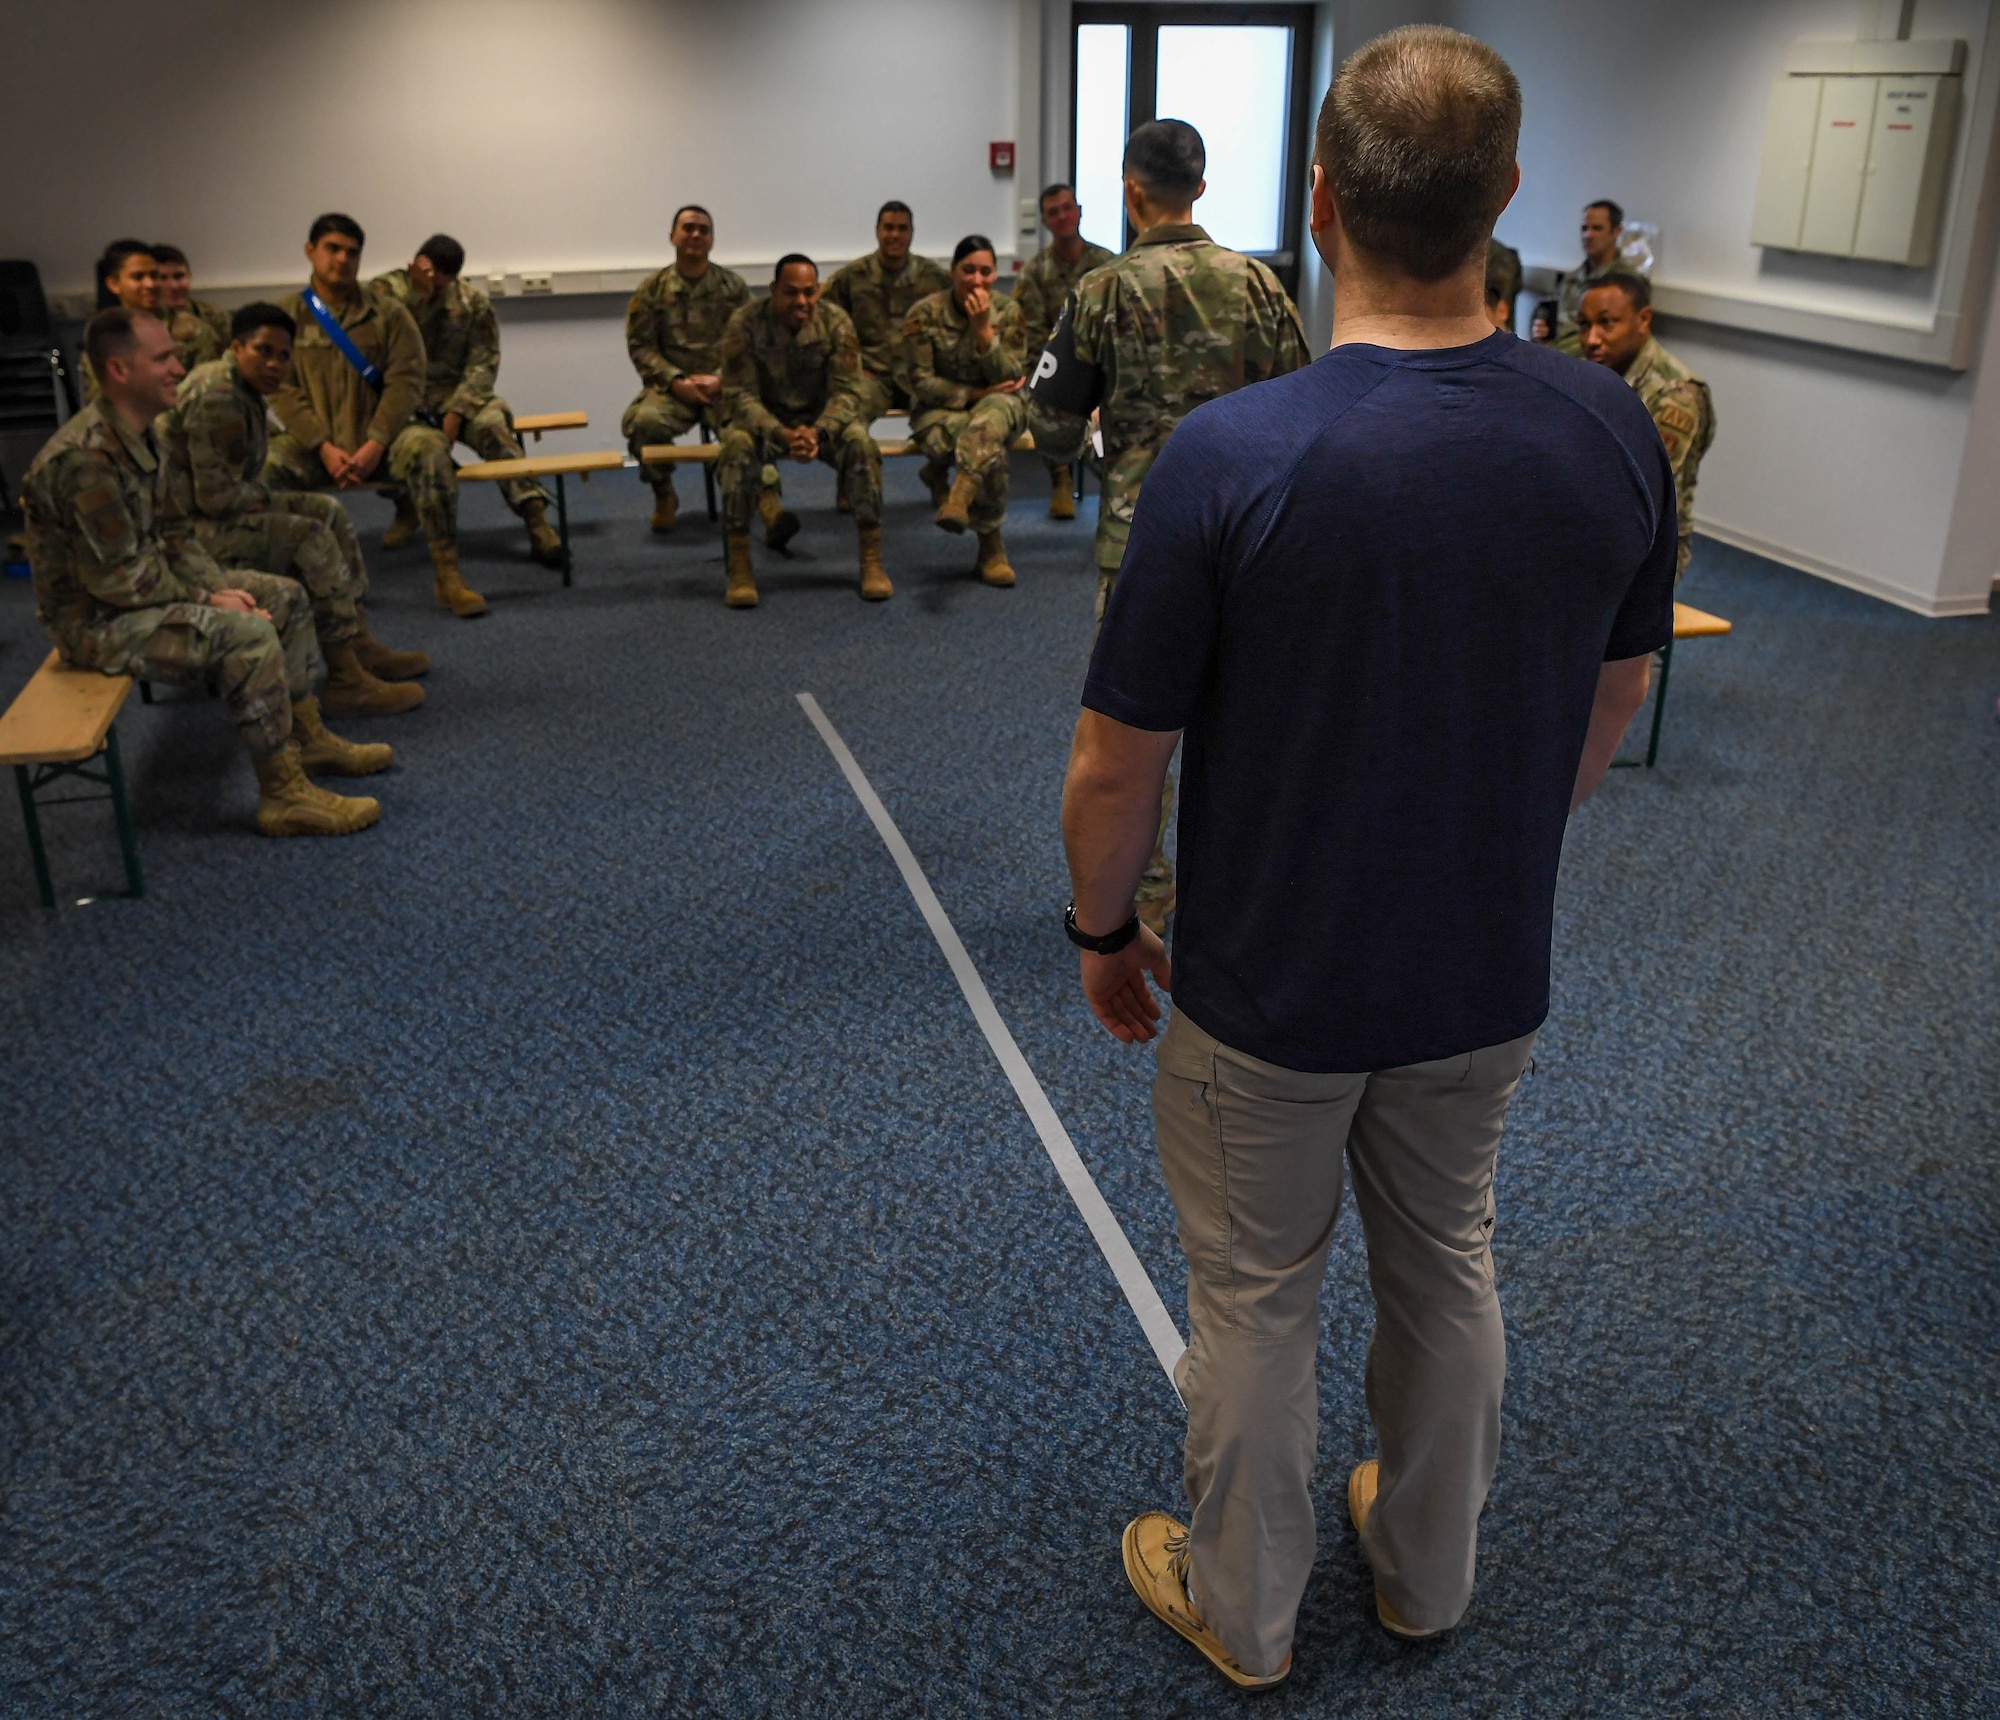 U.S. Air Force Staff Sgt. Madison Alicea, 569th United States Forces Police Squadron unit training instructor, performs standard field sobriety tests on 86th Maintenance Group Airmen at Ramstein Air Base, Germany, Dec. 16, 2021. The purpose of the Wet Lab event is to show the direct impact of alcohol consumption on various body compositions in order to deter people from drinking and driving. (U.S. Air Force photo by Airman Jared Lovett)